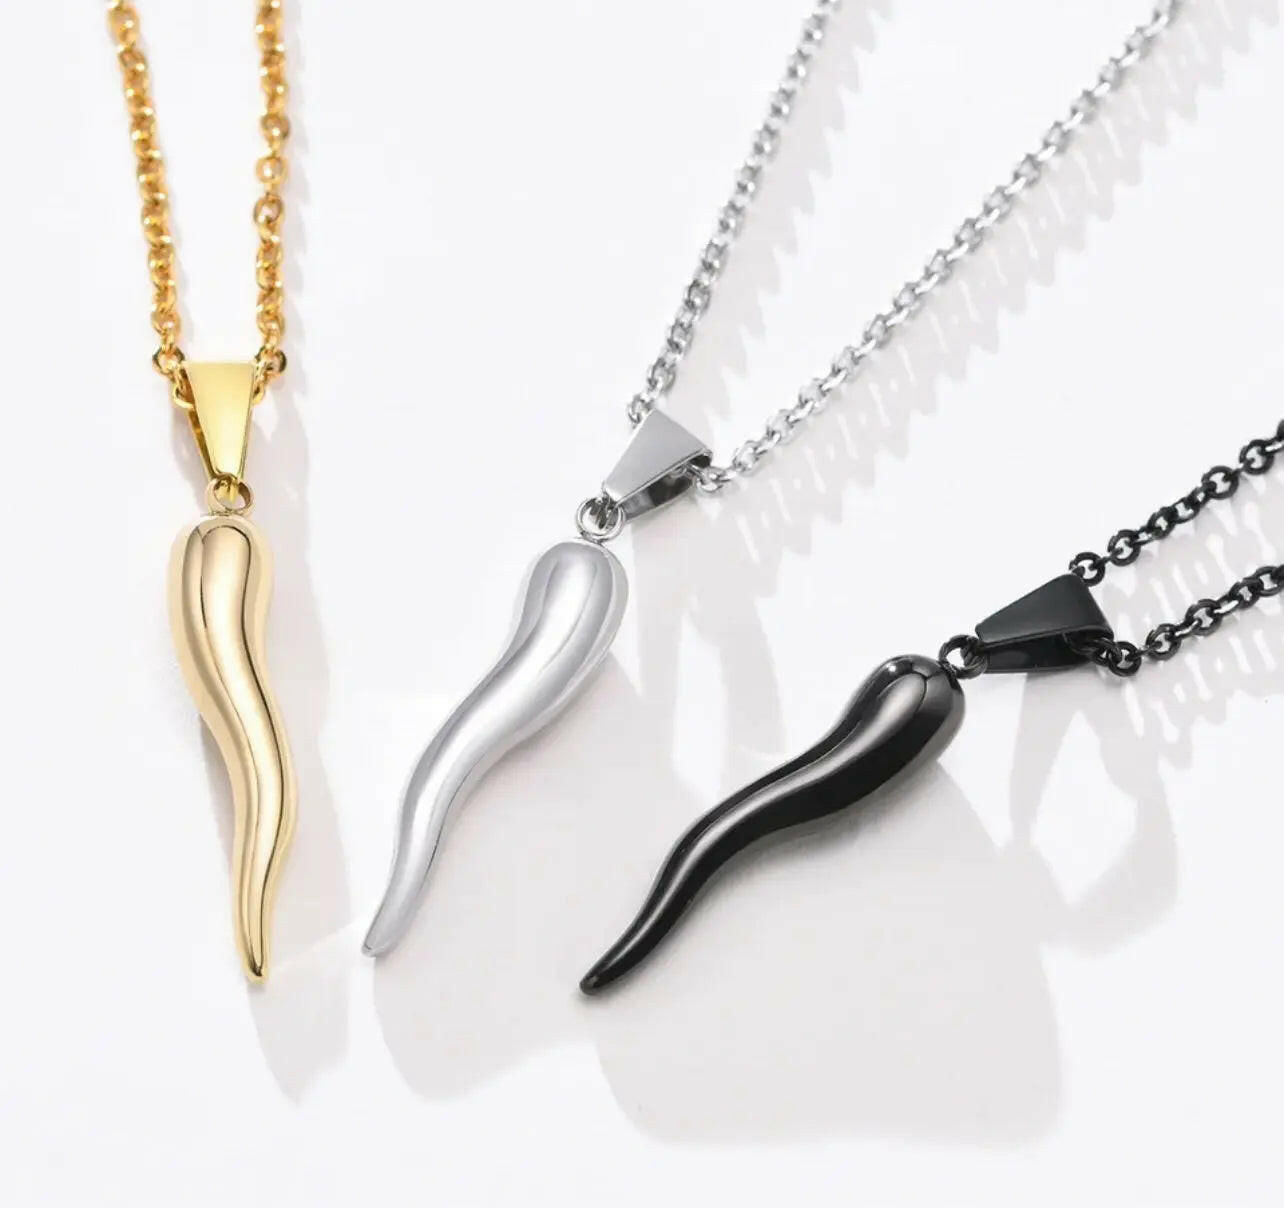 1 Italian Horn Necklace - In Stainless Steel - Unisex ItalianandmoreCo